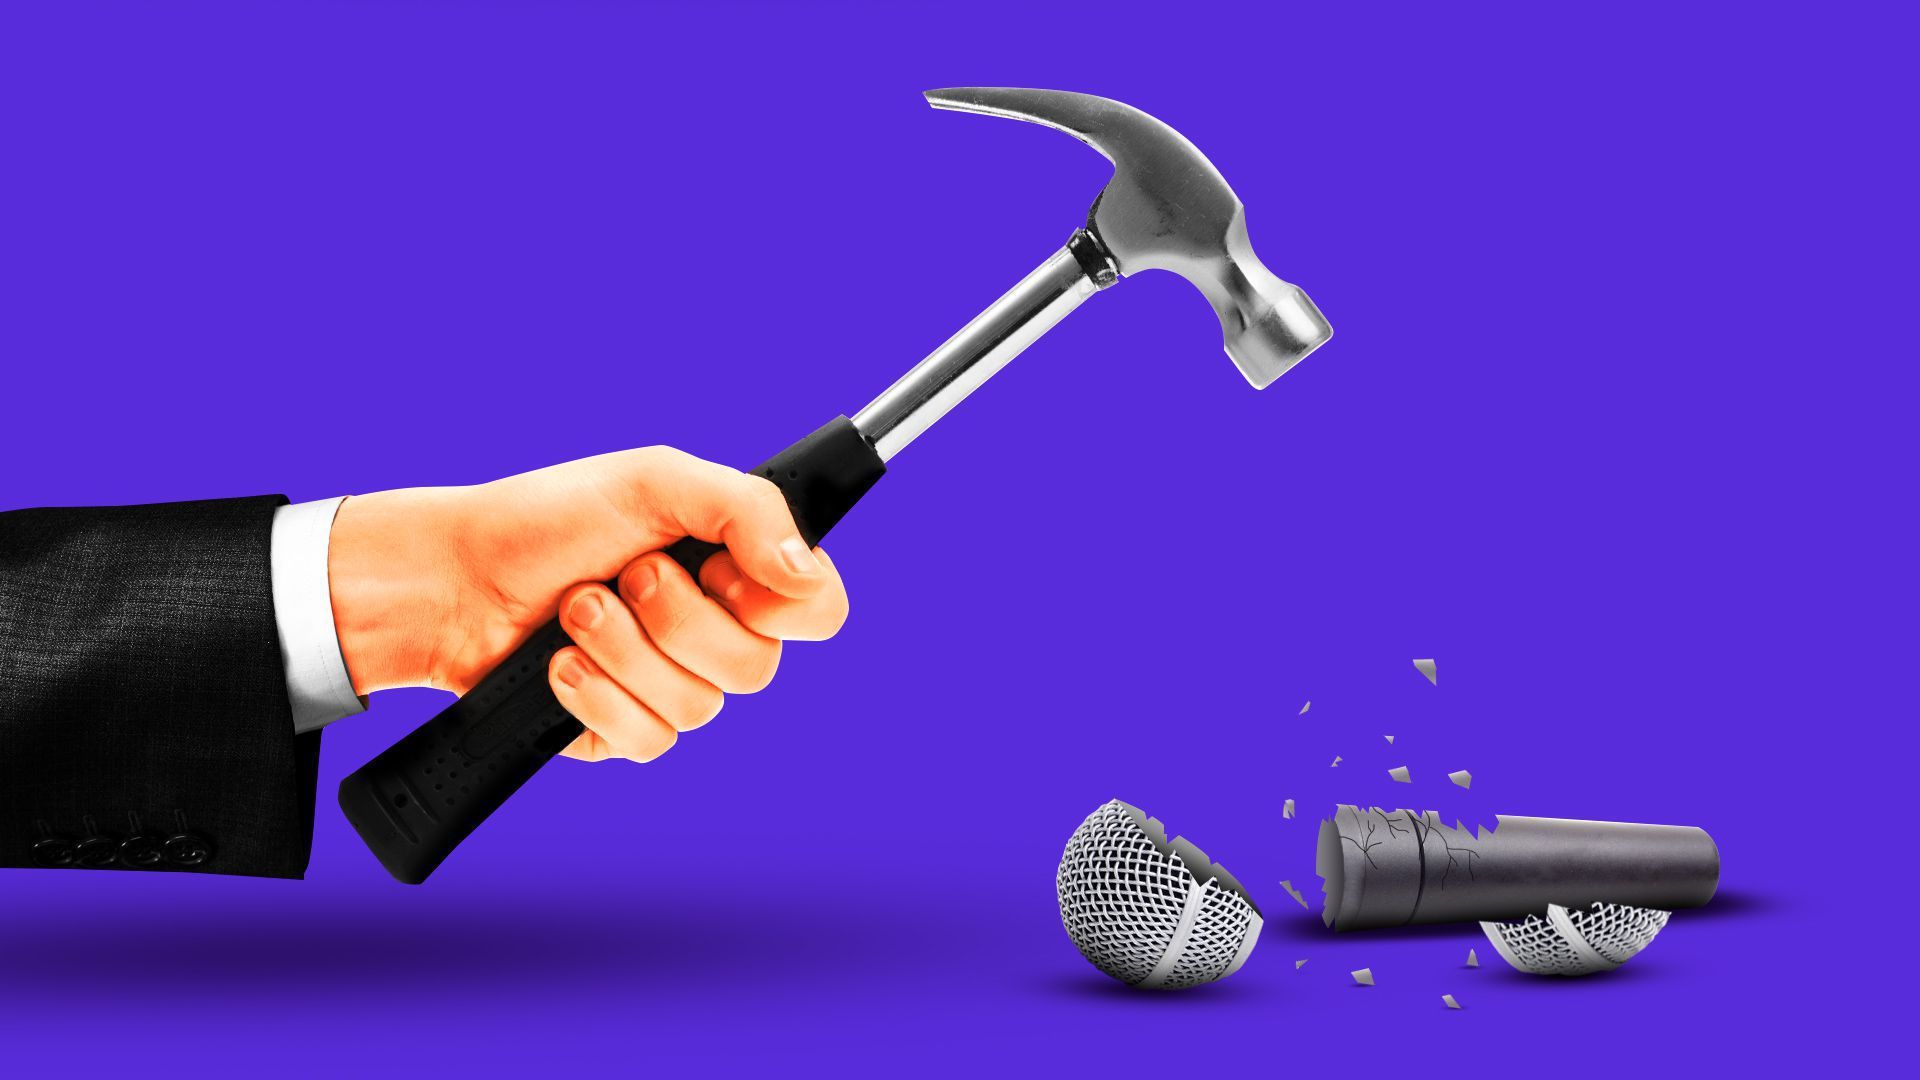 An illustration shows a hammer breaking a microphone.